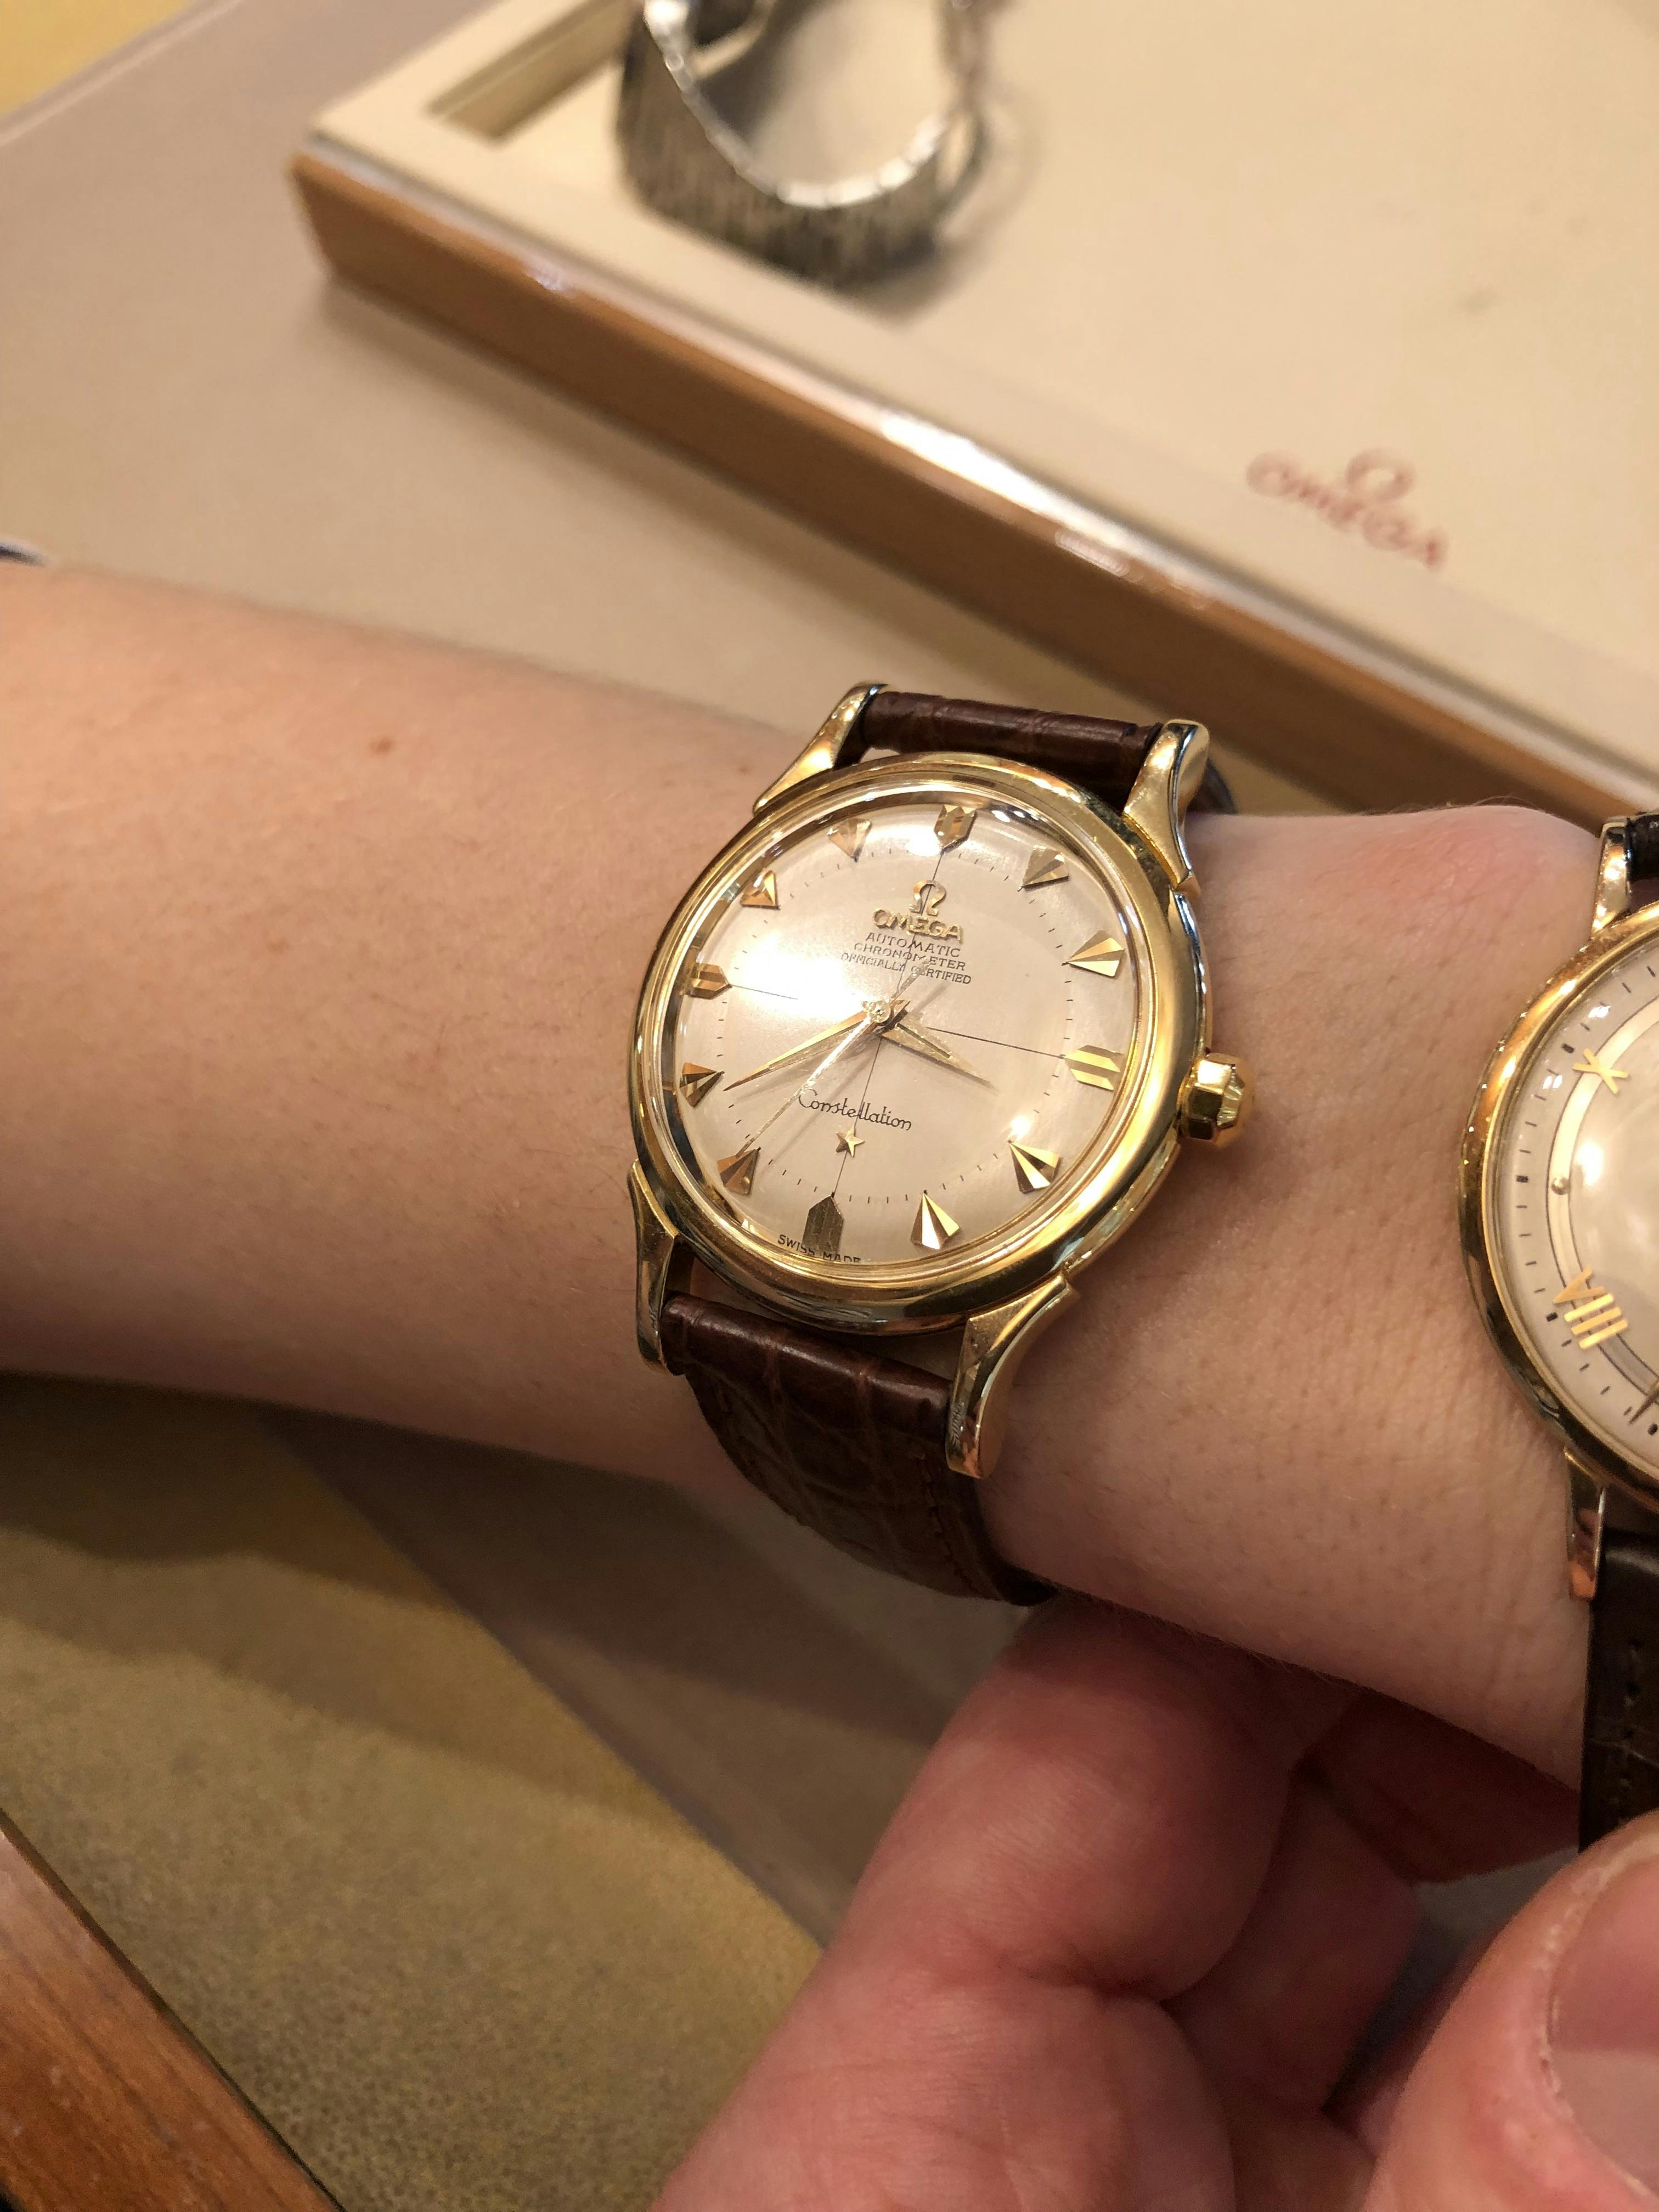 Some vintage Omega's being sold by a specialist dealer